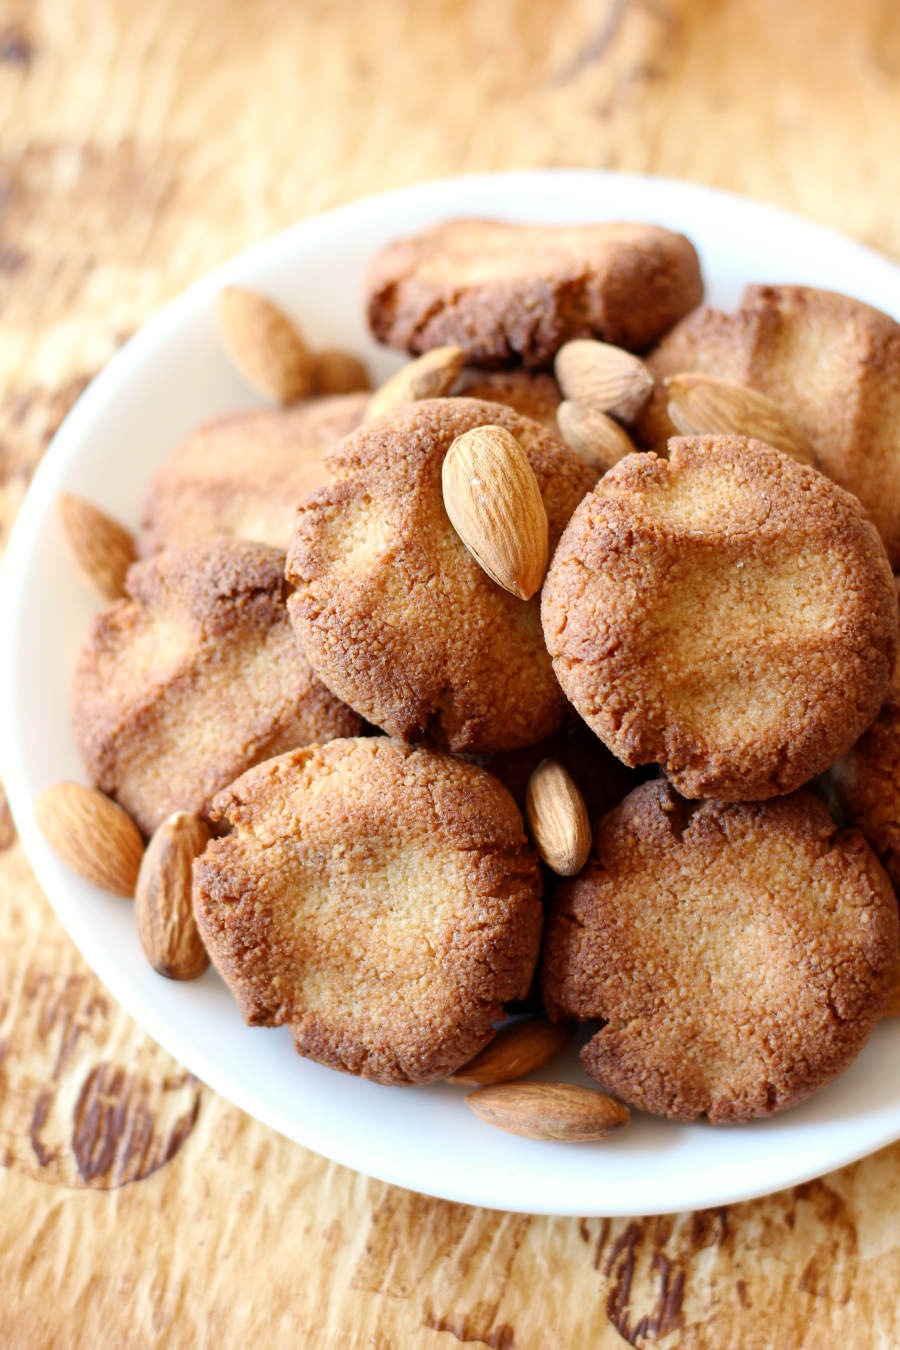 Grain-Free Amaretto Cookies | Strength and Sunshine @RebeccaGF666 The classic Italian cookie now as a healthy gluten-free, vegan, and paleo recipe! Grain-Free Amaretto Cookies made with almond flour and no added sugars or oils will be a delicious addition to the dessert platter!